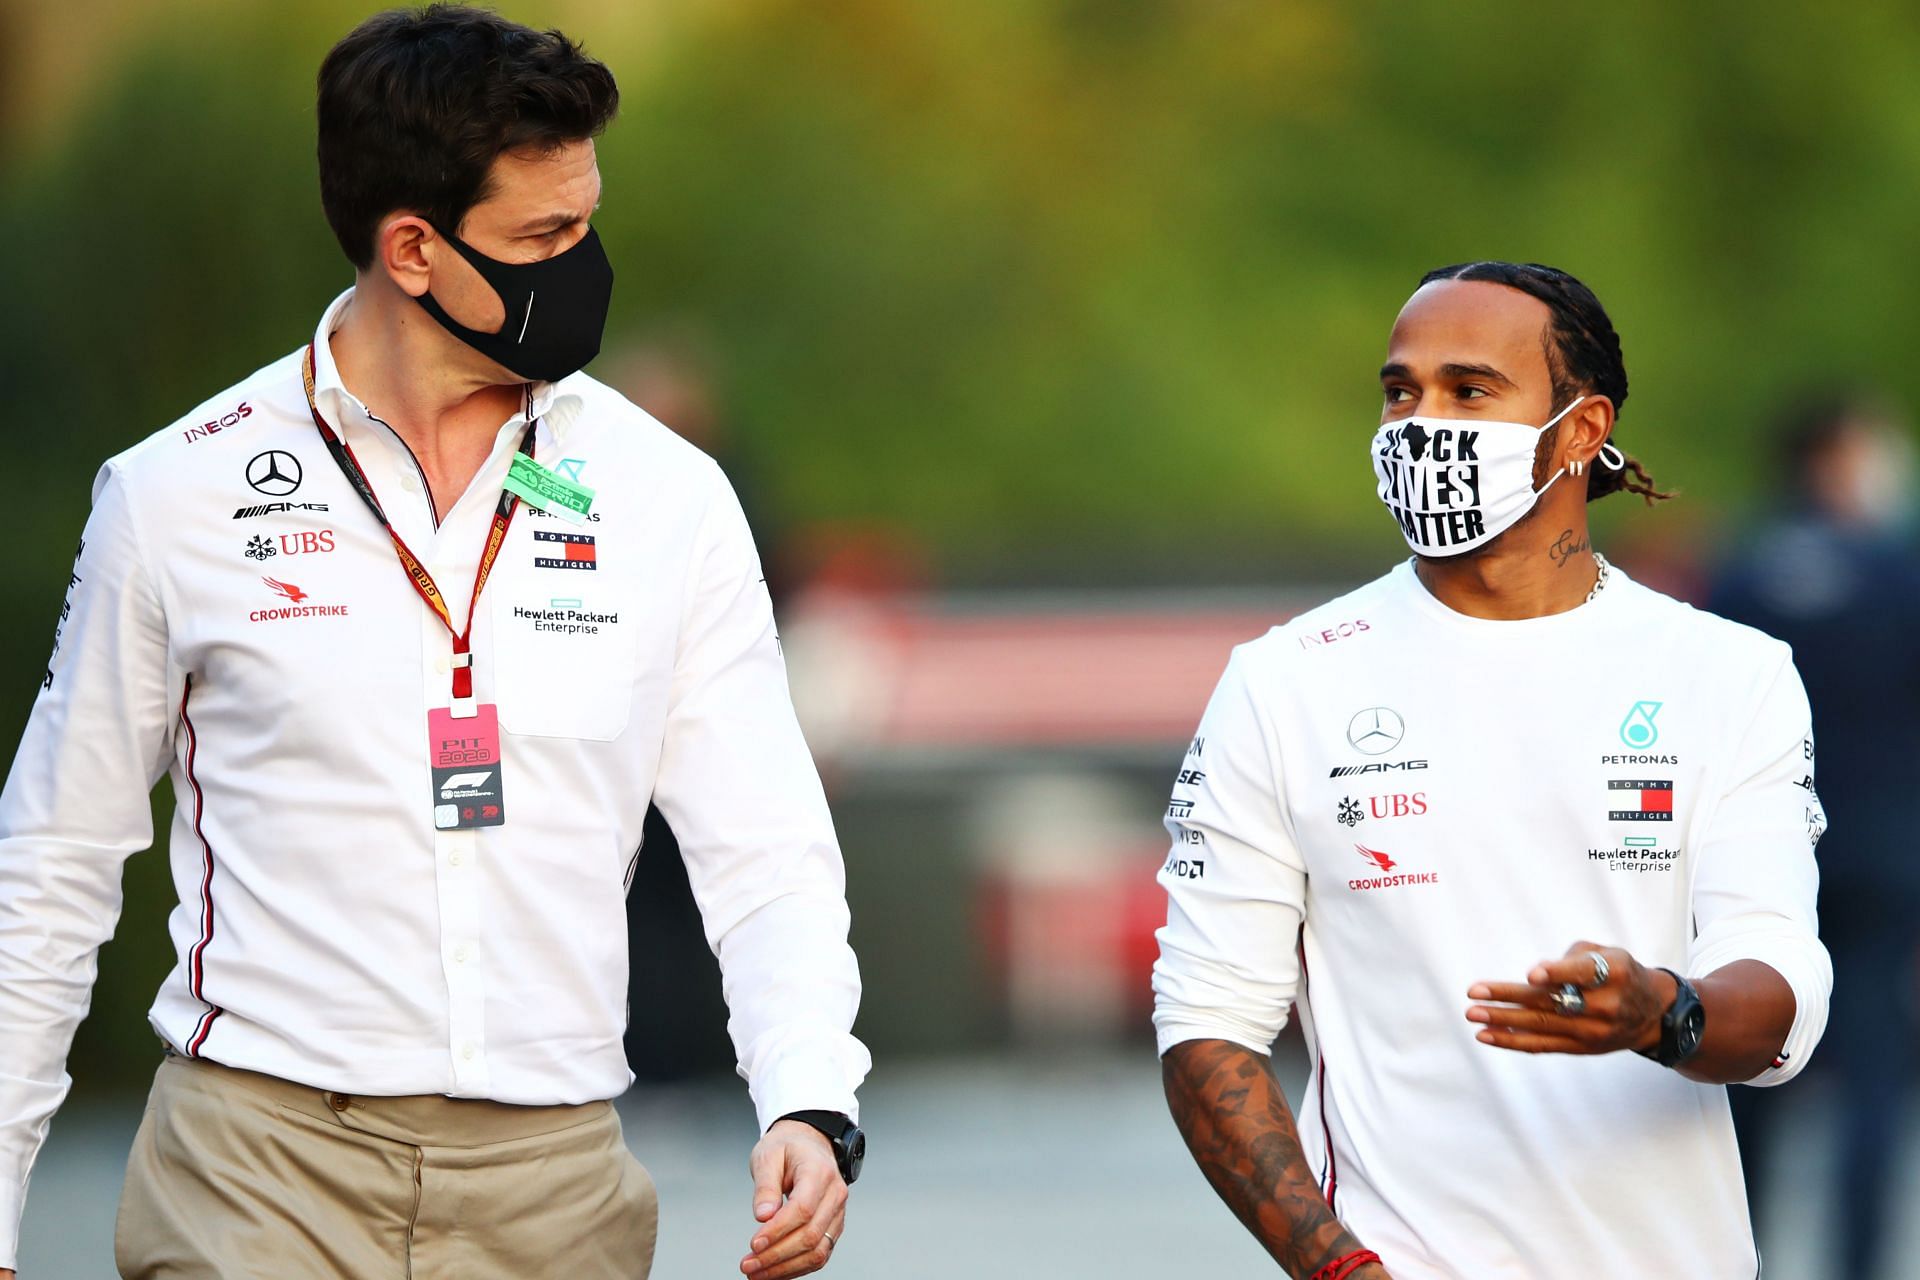 Toto Wolff (left) and Lewis Hamilton (right) at the F1 Grand Prix of Emilia Romagna - Previews